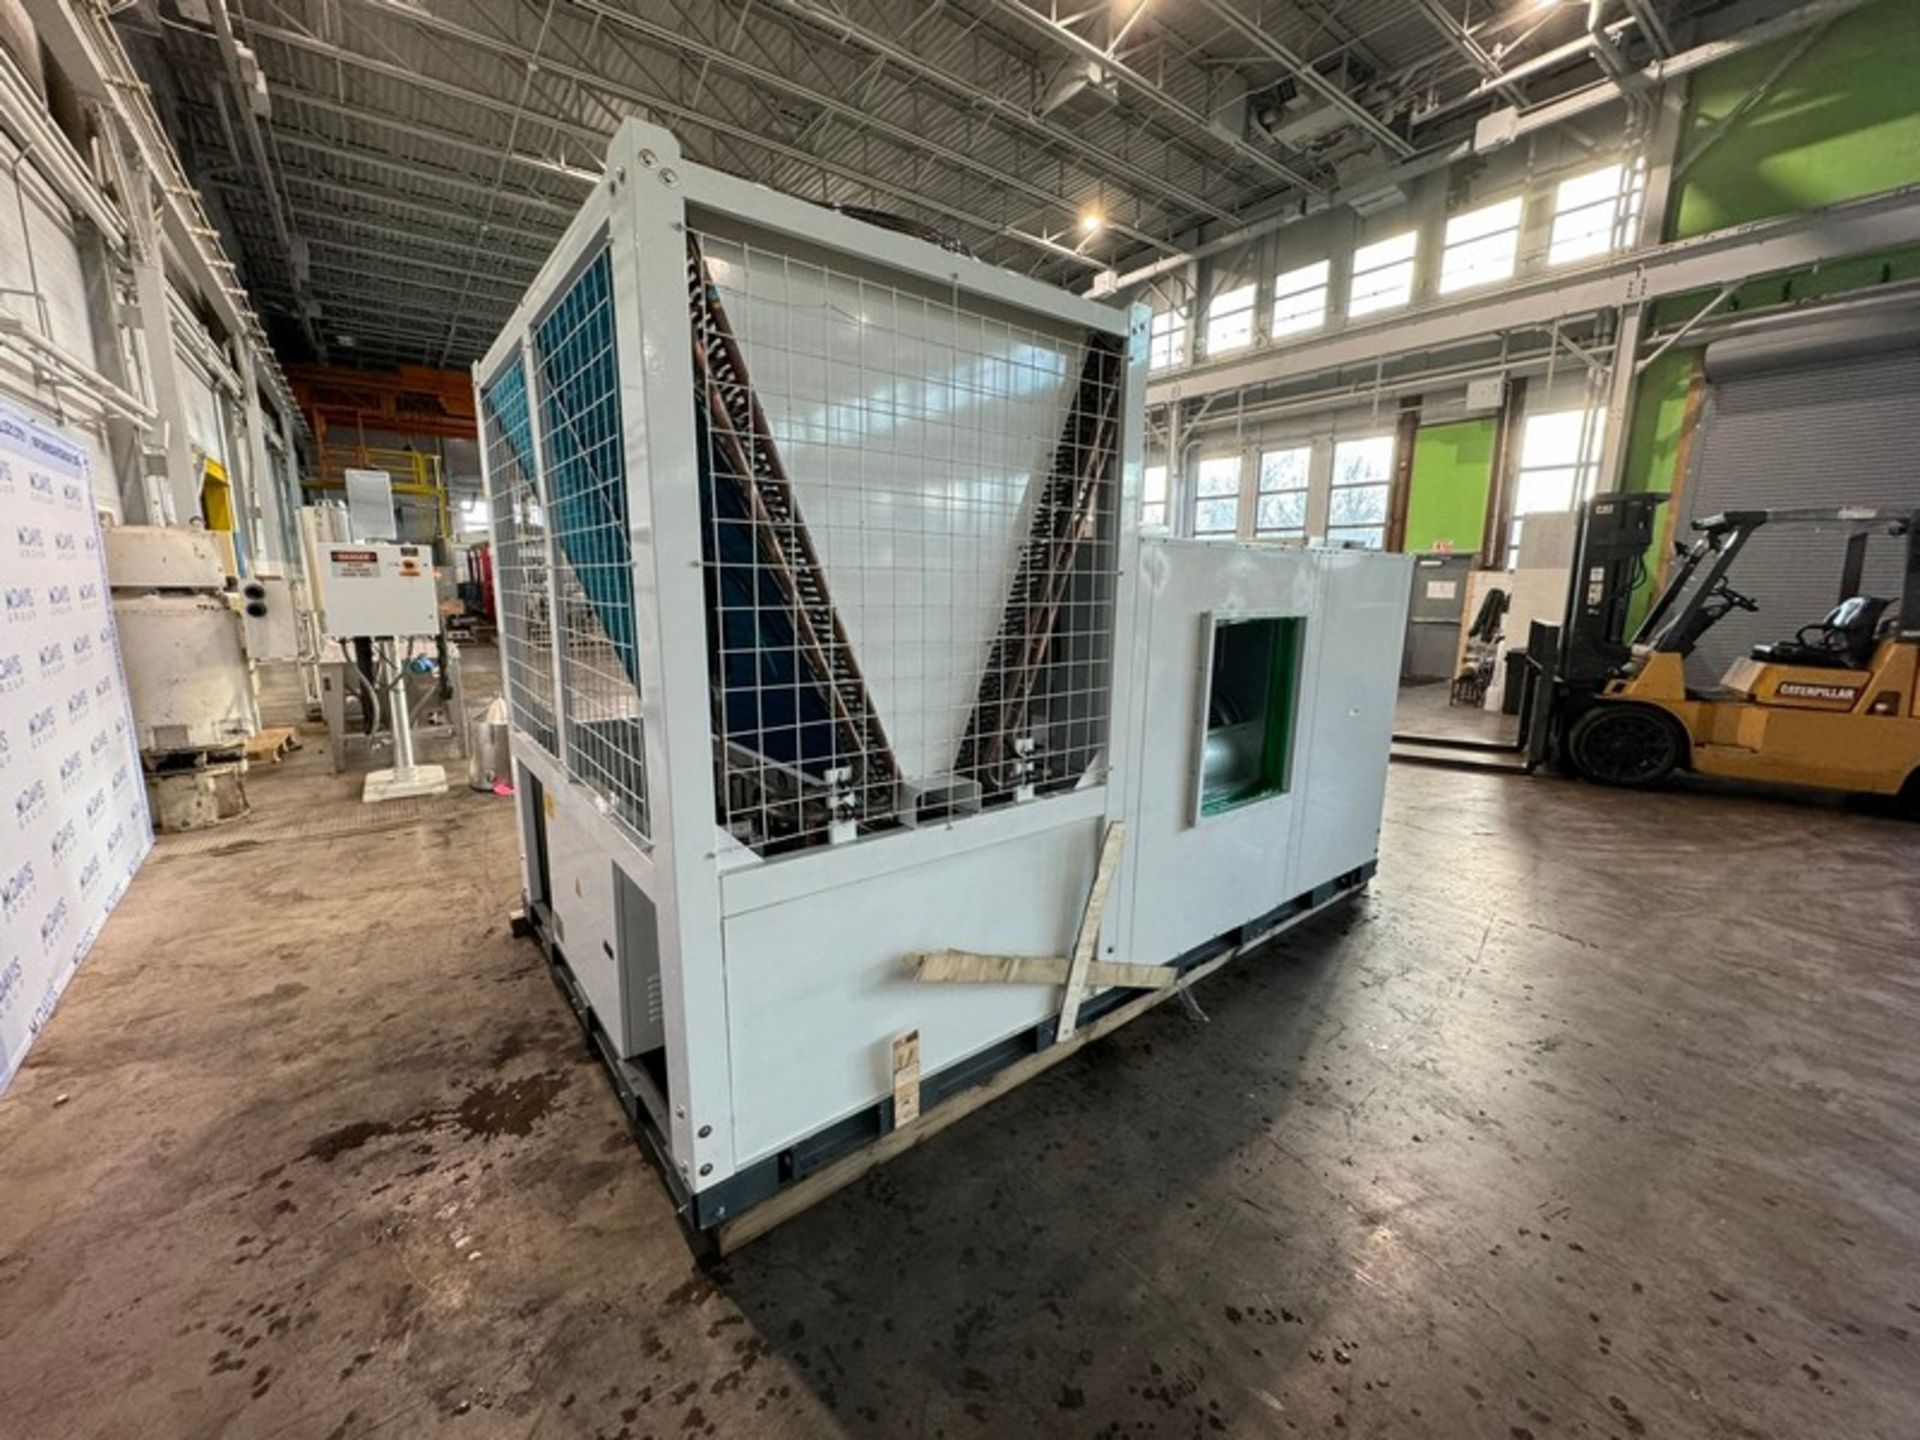 NEW 2022 SHENHLIN Roof Mounted Air Cooled Package Unit, S/N C5020221018R002, Cooling Capacity: 140.2 - Image 12 of 17